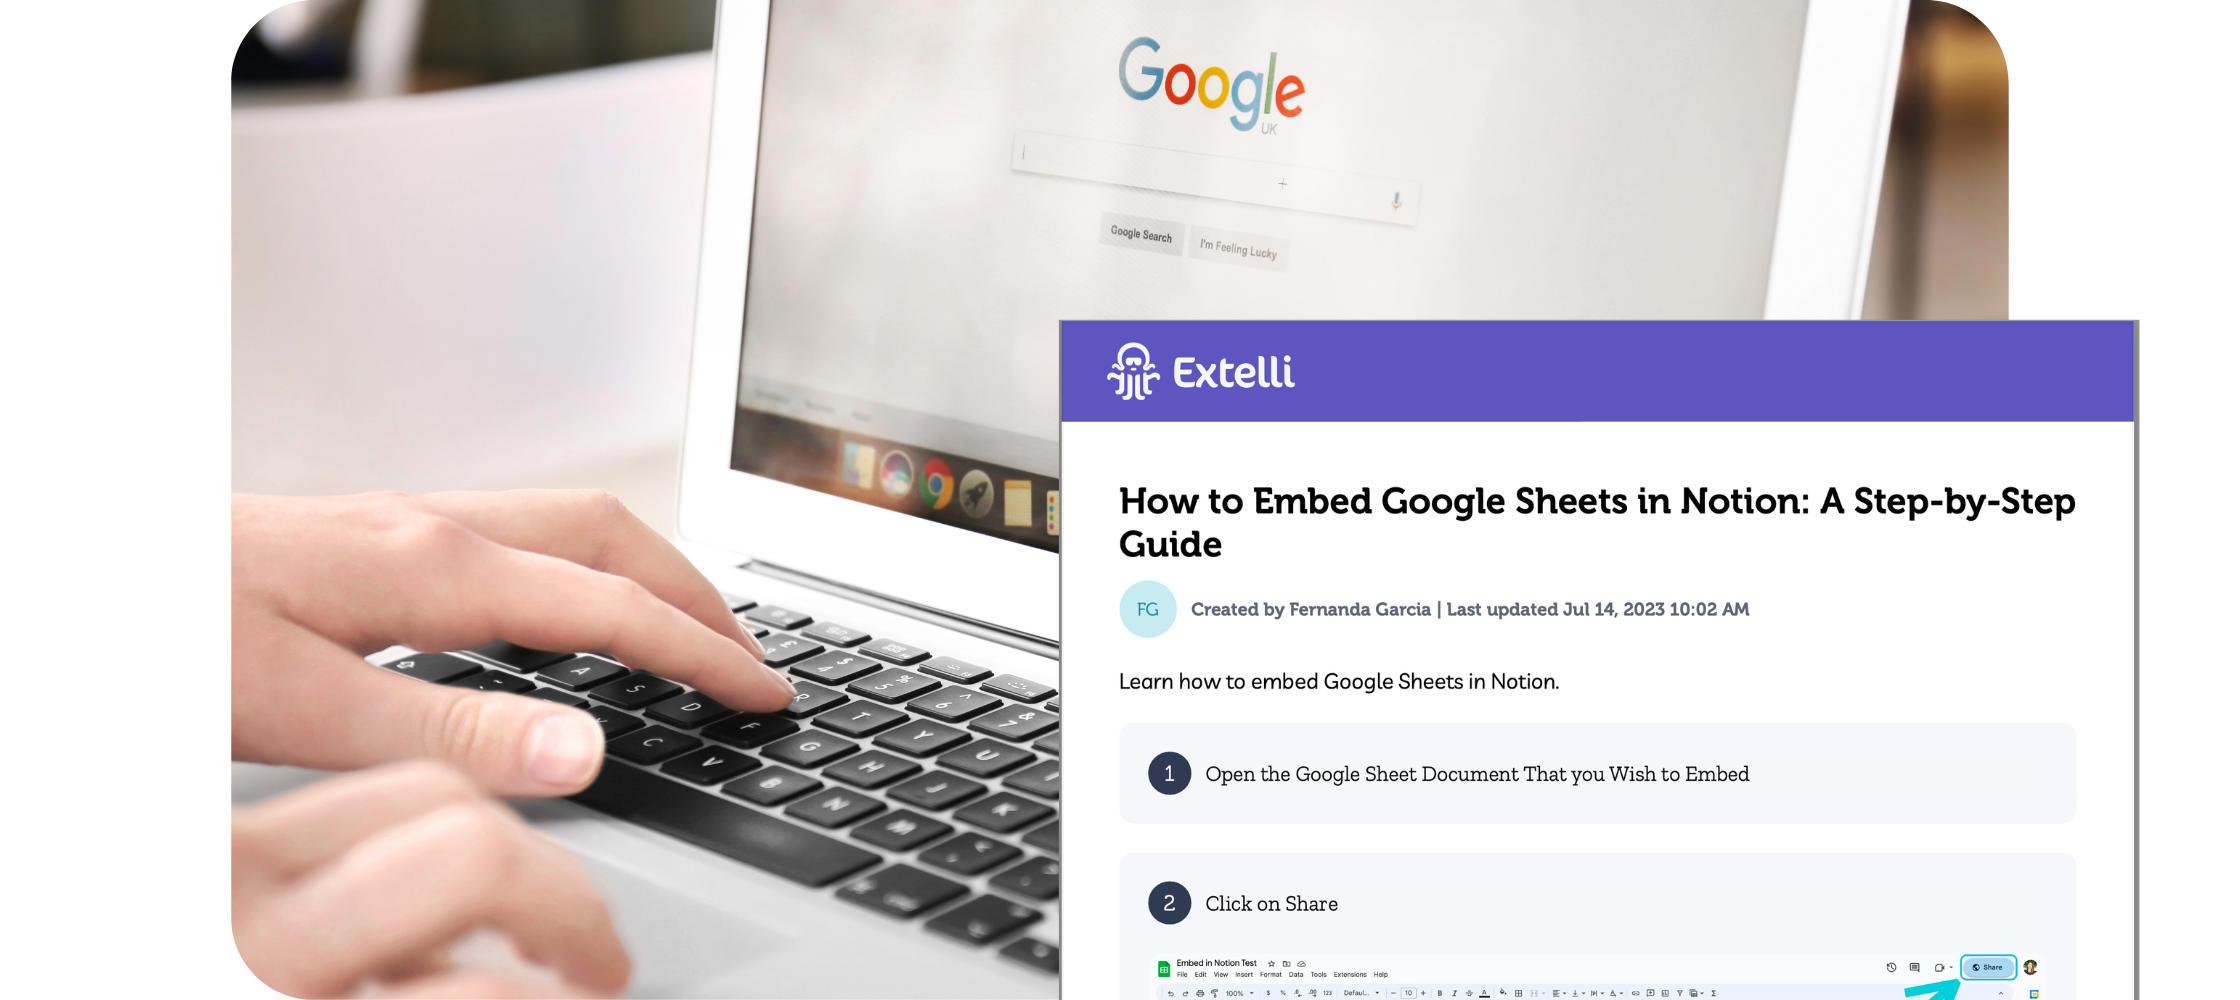 How to Embed Google Sheets in Notion: An Interactive Step-by-Step Guide